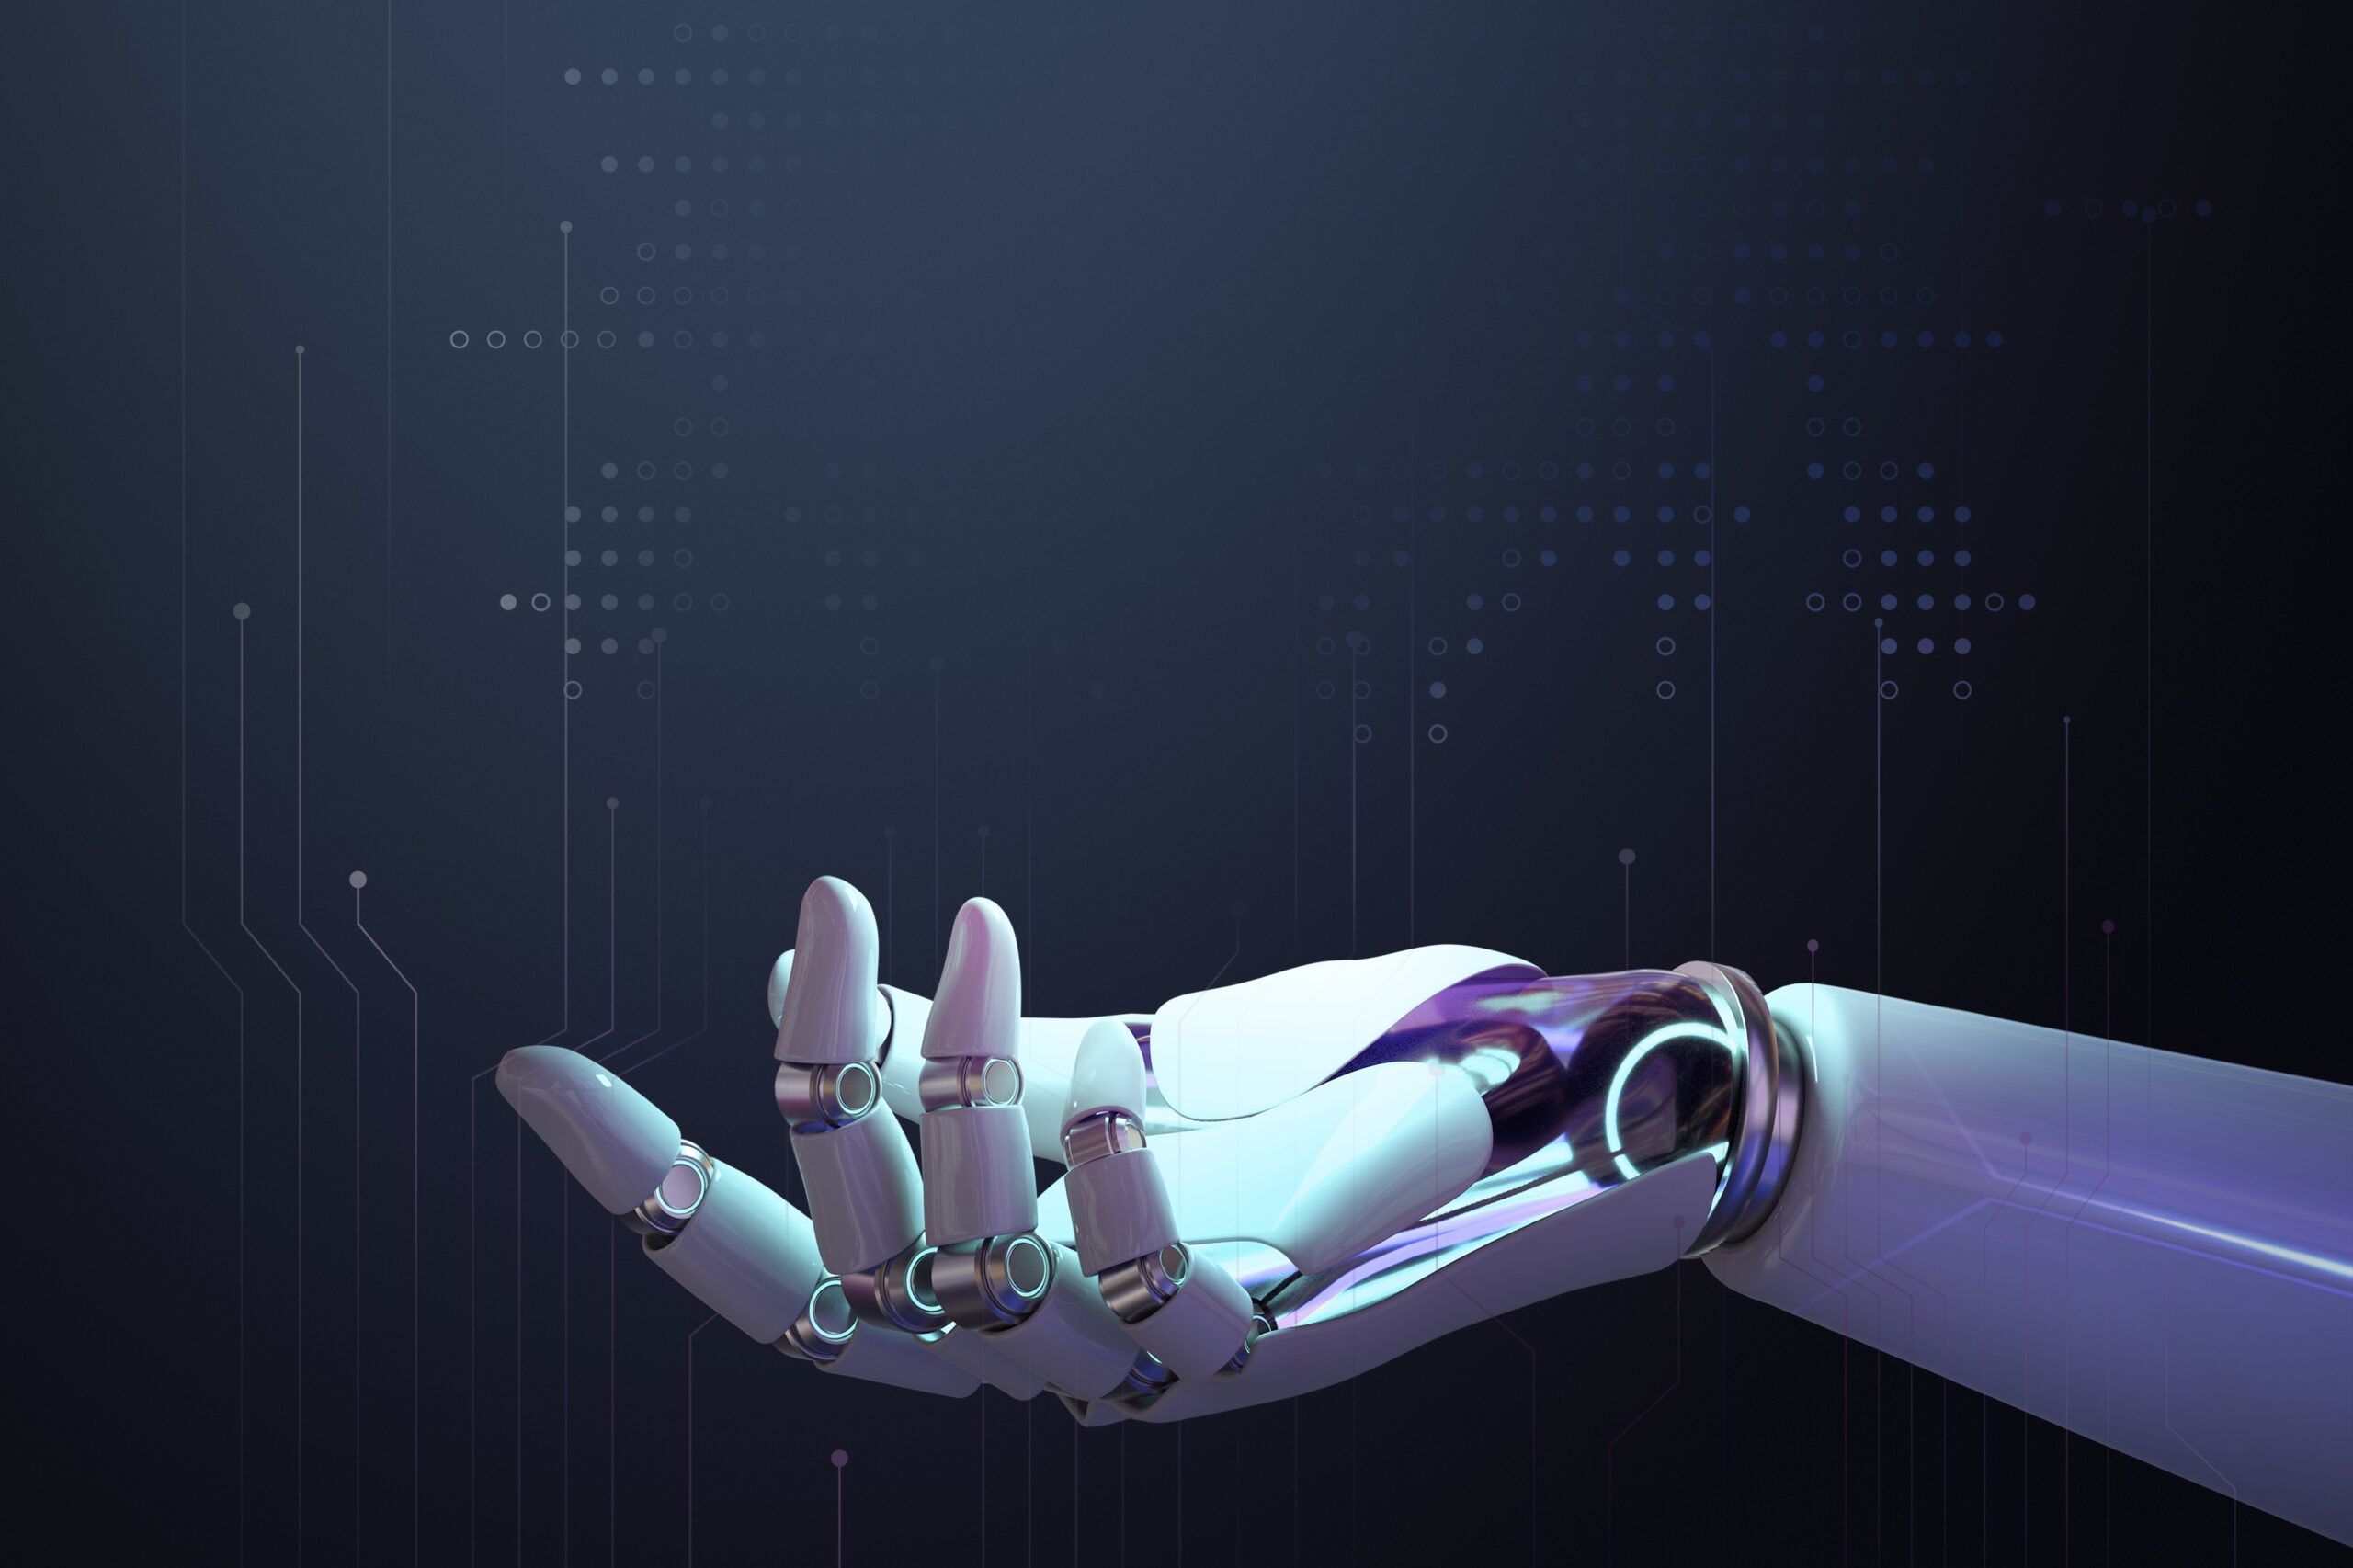 Description: Graphic of a robot hand and arm with a dark background

Caption: AI Berkeley Lab IT offers a comprehensive suite of AI services which combines collaboration tools with cutting-edge research capabilities under our ScienceIT program.   